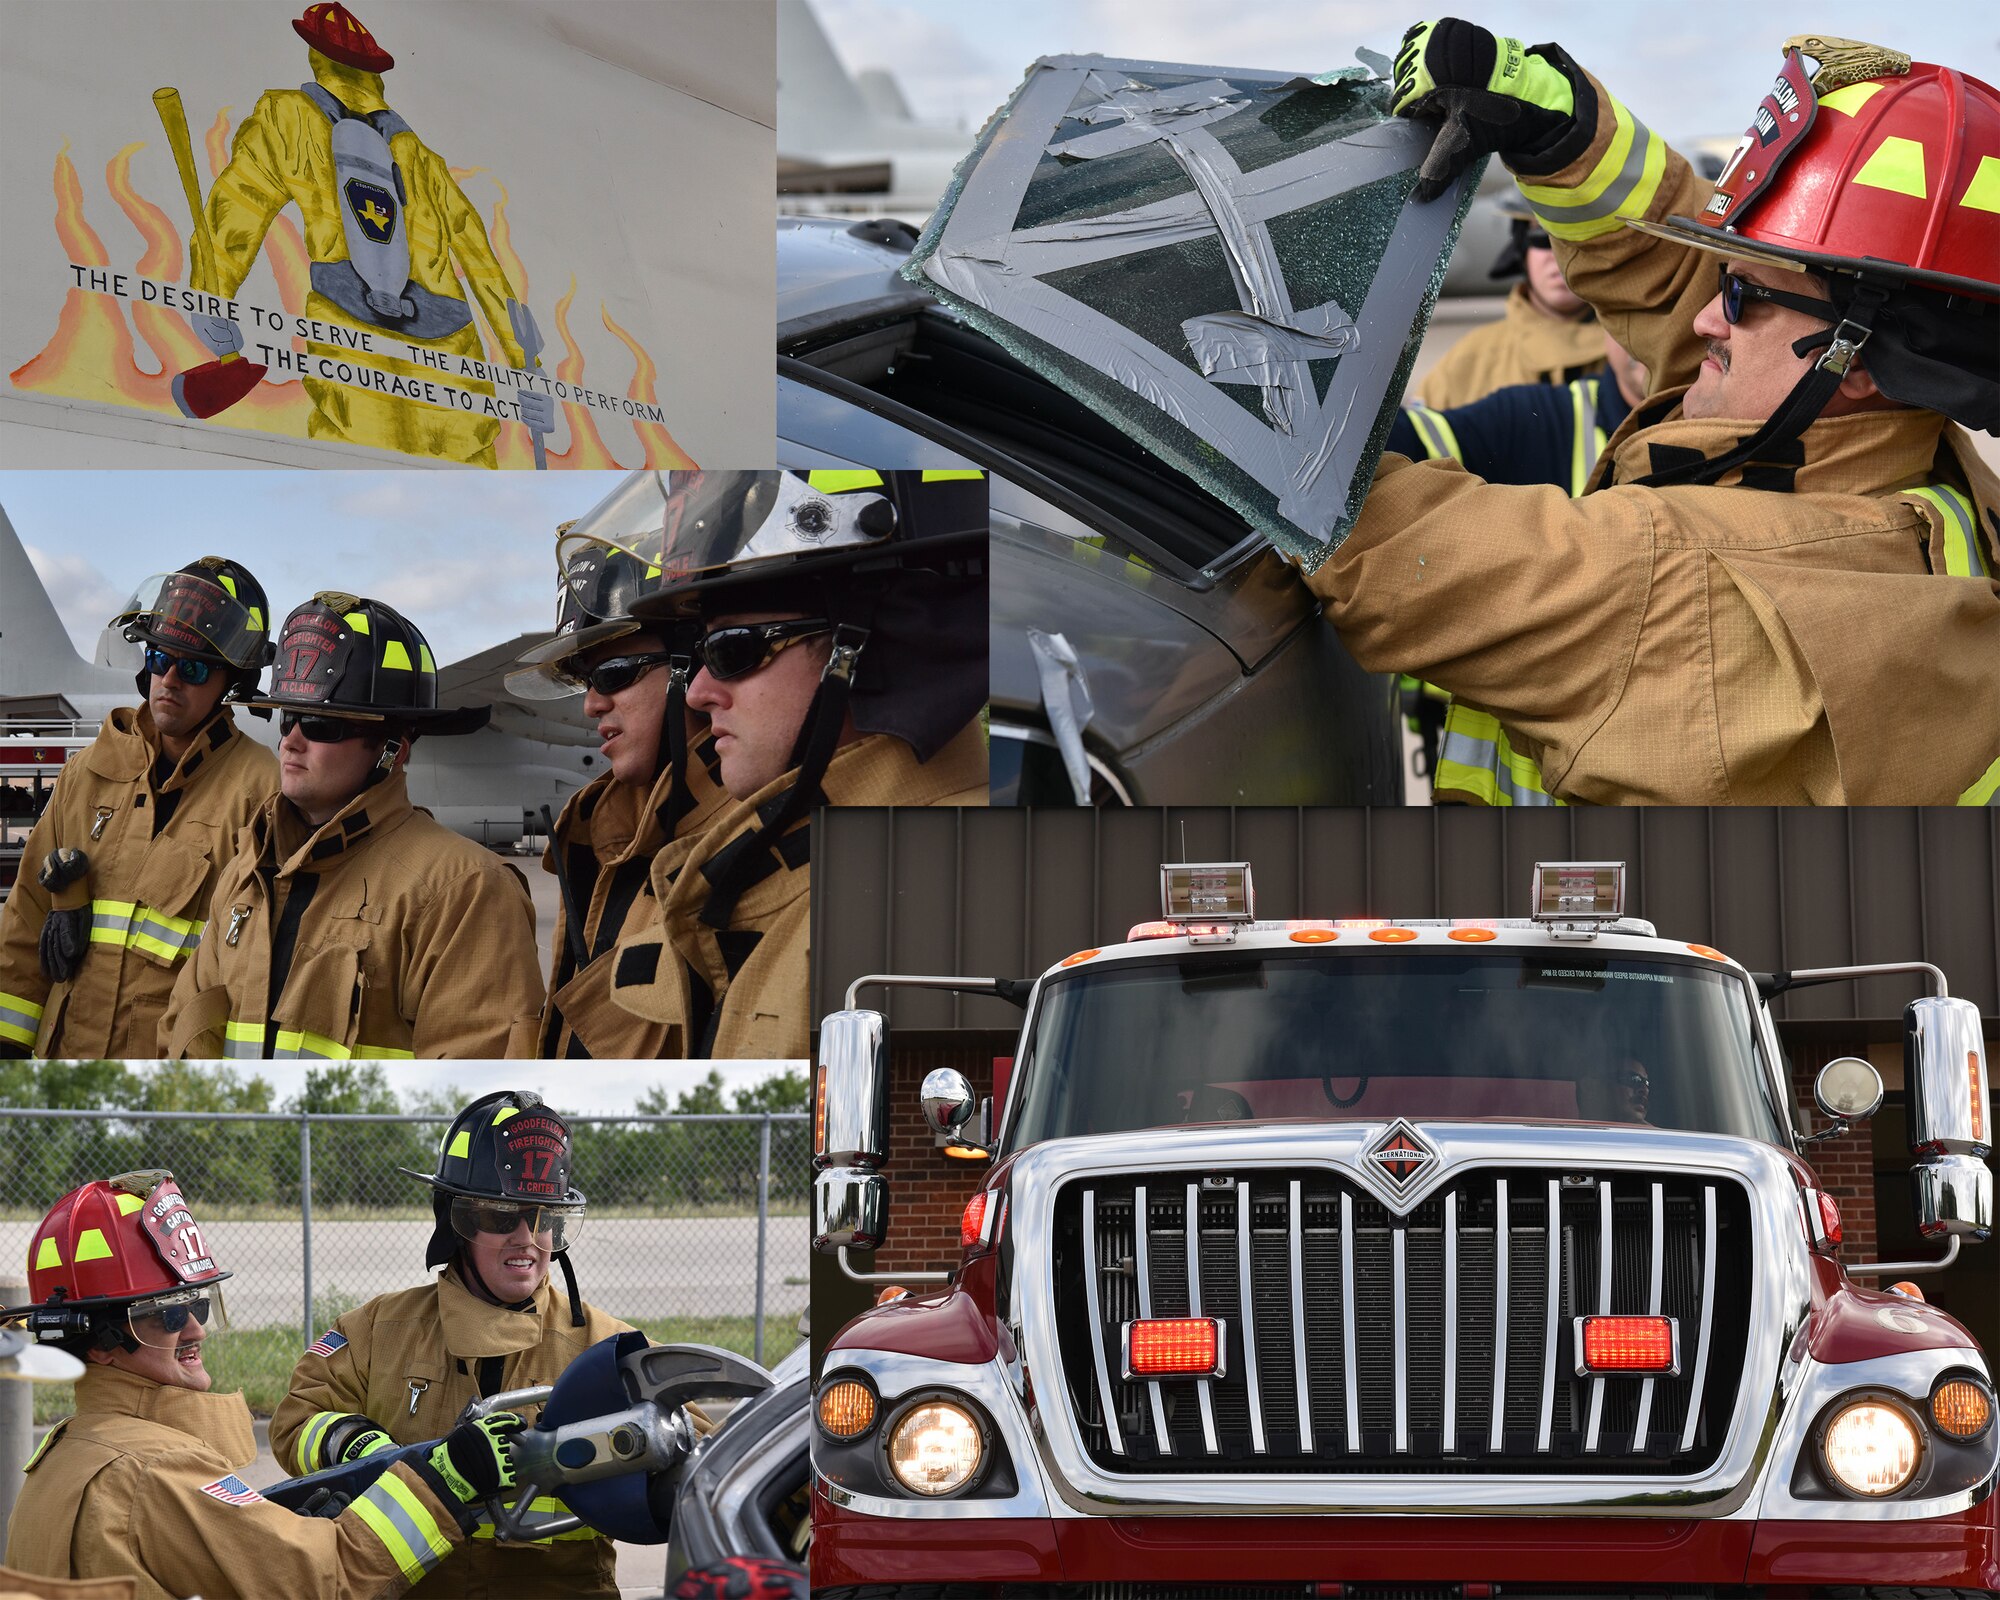 A photo collage showcasing the 17th Civil Engineer Squadron Fire Services on Goodfellow Air Force Base, Texas. The Goodfellow Fire Department is an all hazards response organization providing emergency medical, fire suppression, technical rescue, fire inspection, public education and hazardous material response. (U.S. Air Force illustration by Senior Airman Jermaine Ayers)